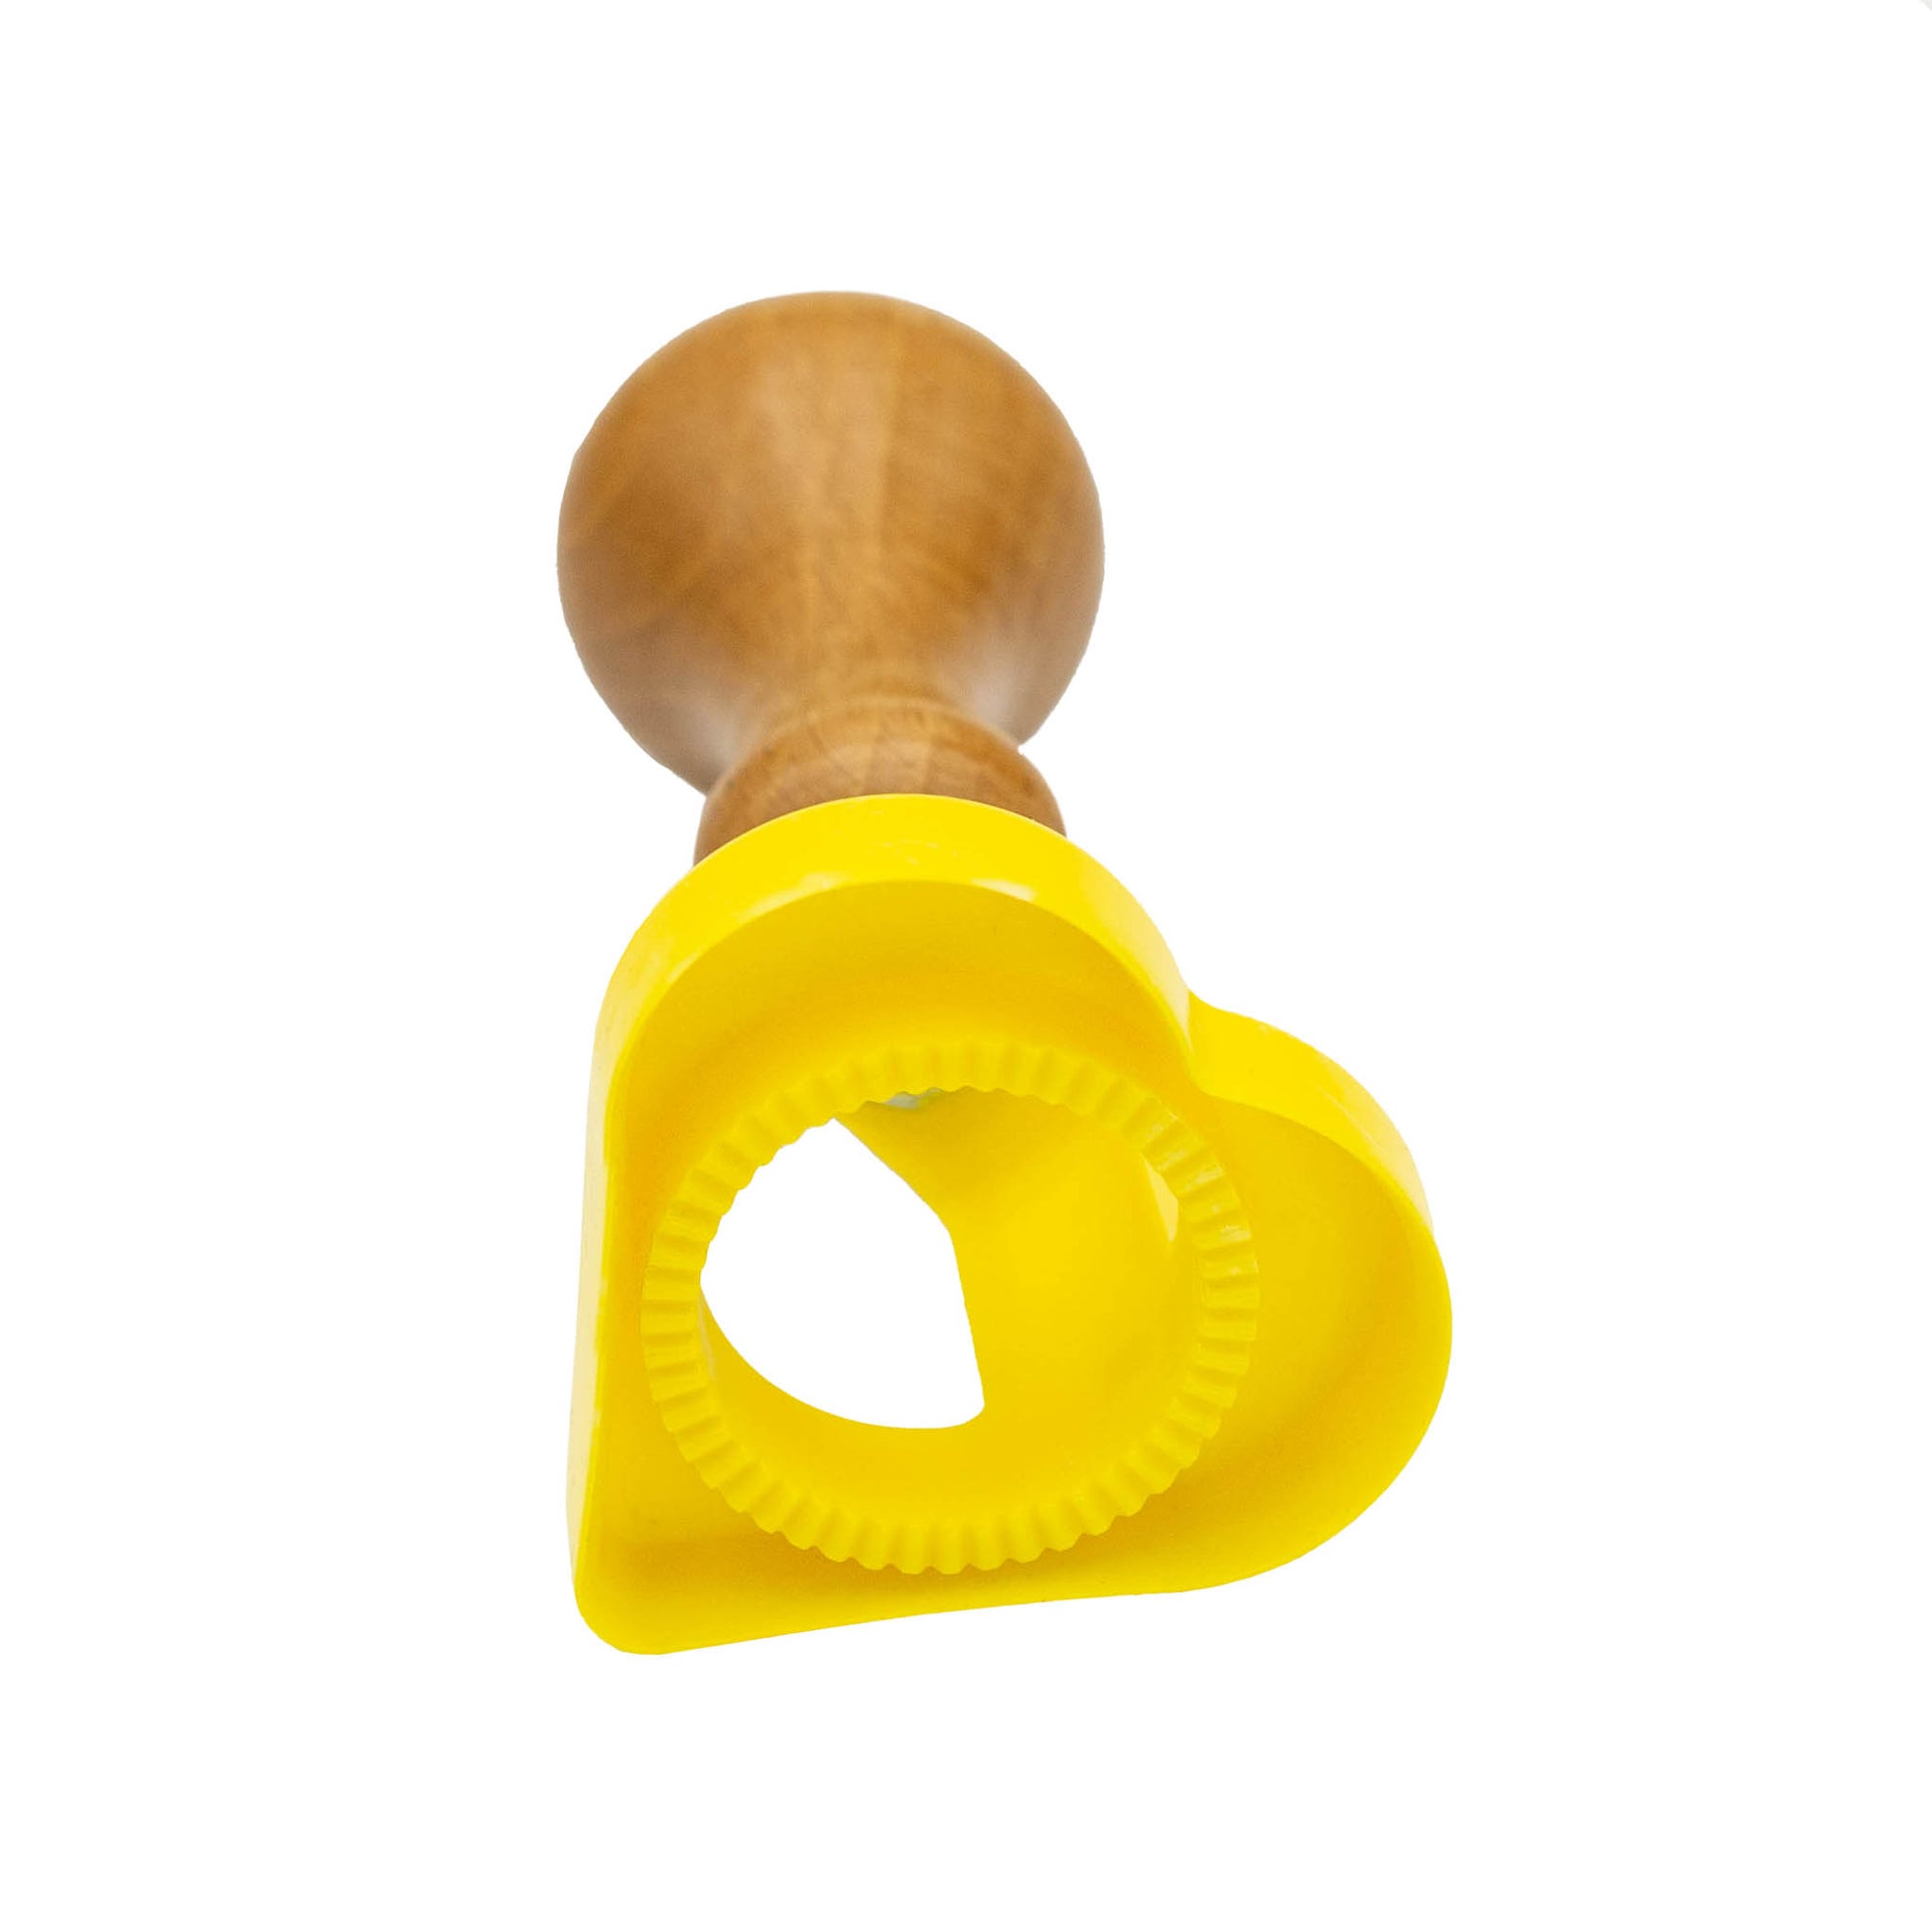 Yellow plastic heart shape biscuit and pasta cutter with wooden handle. 